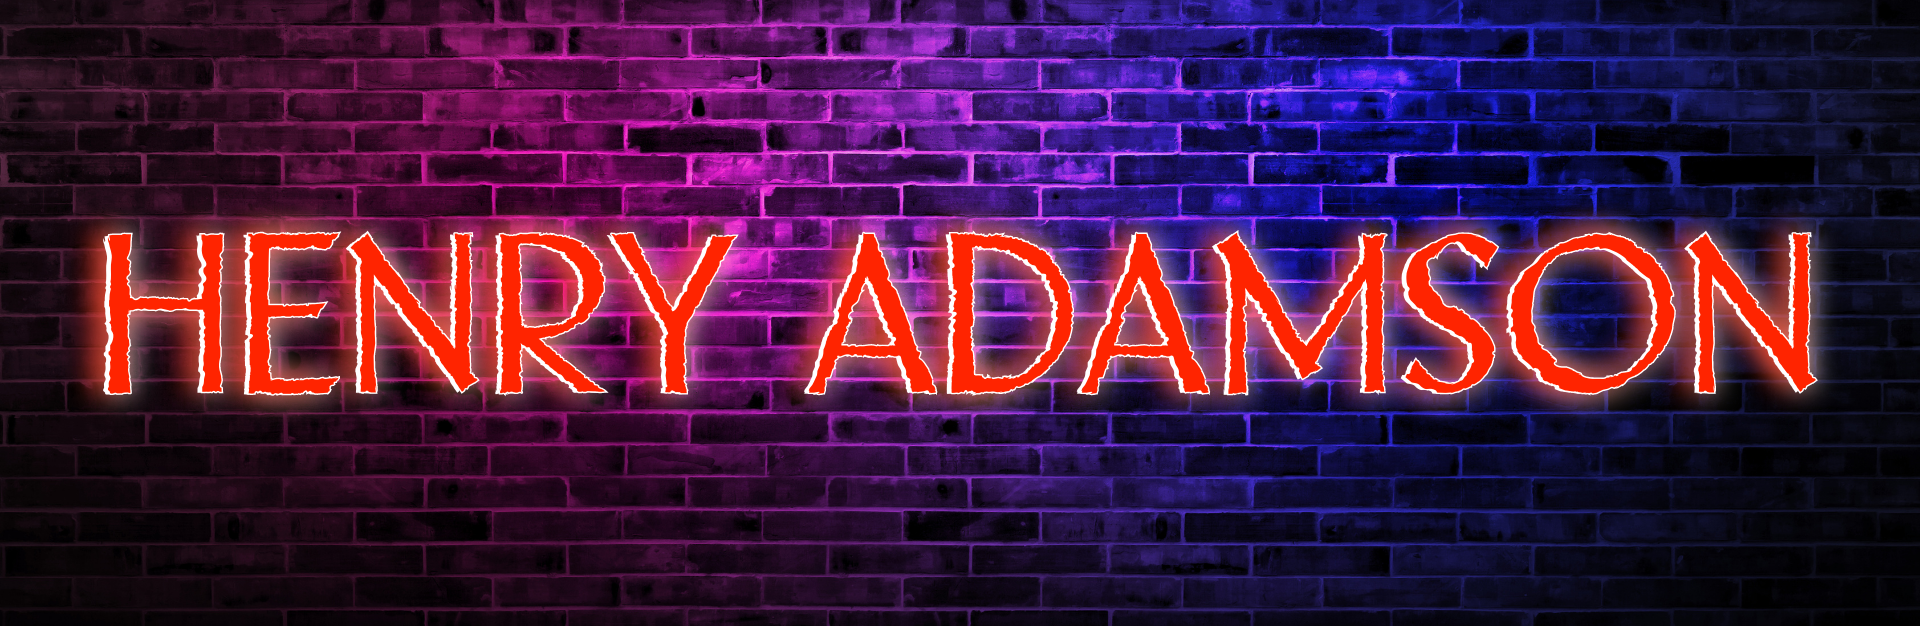 A brick wall bathed in blue and pink neon light. The name HENRY ADAMSON sits in front of it.